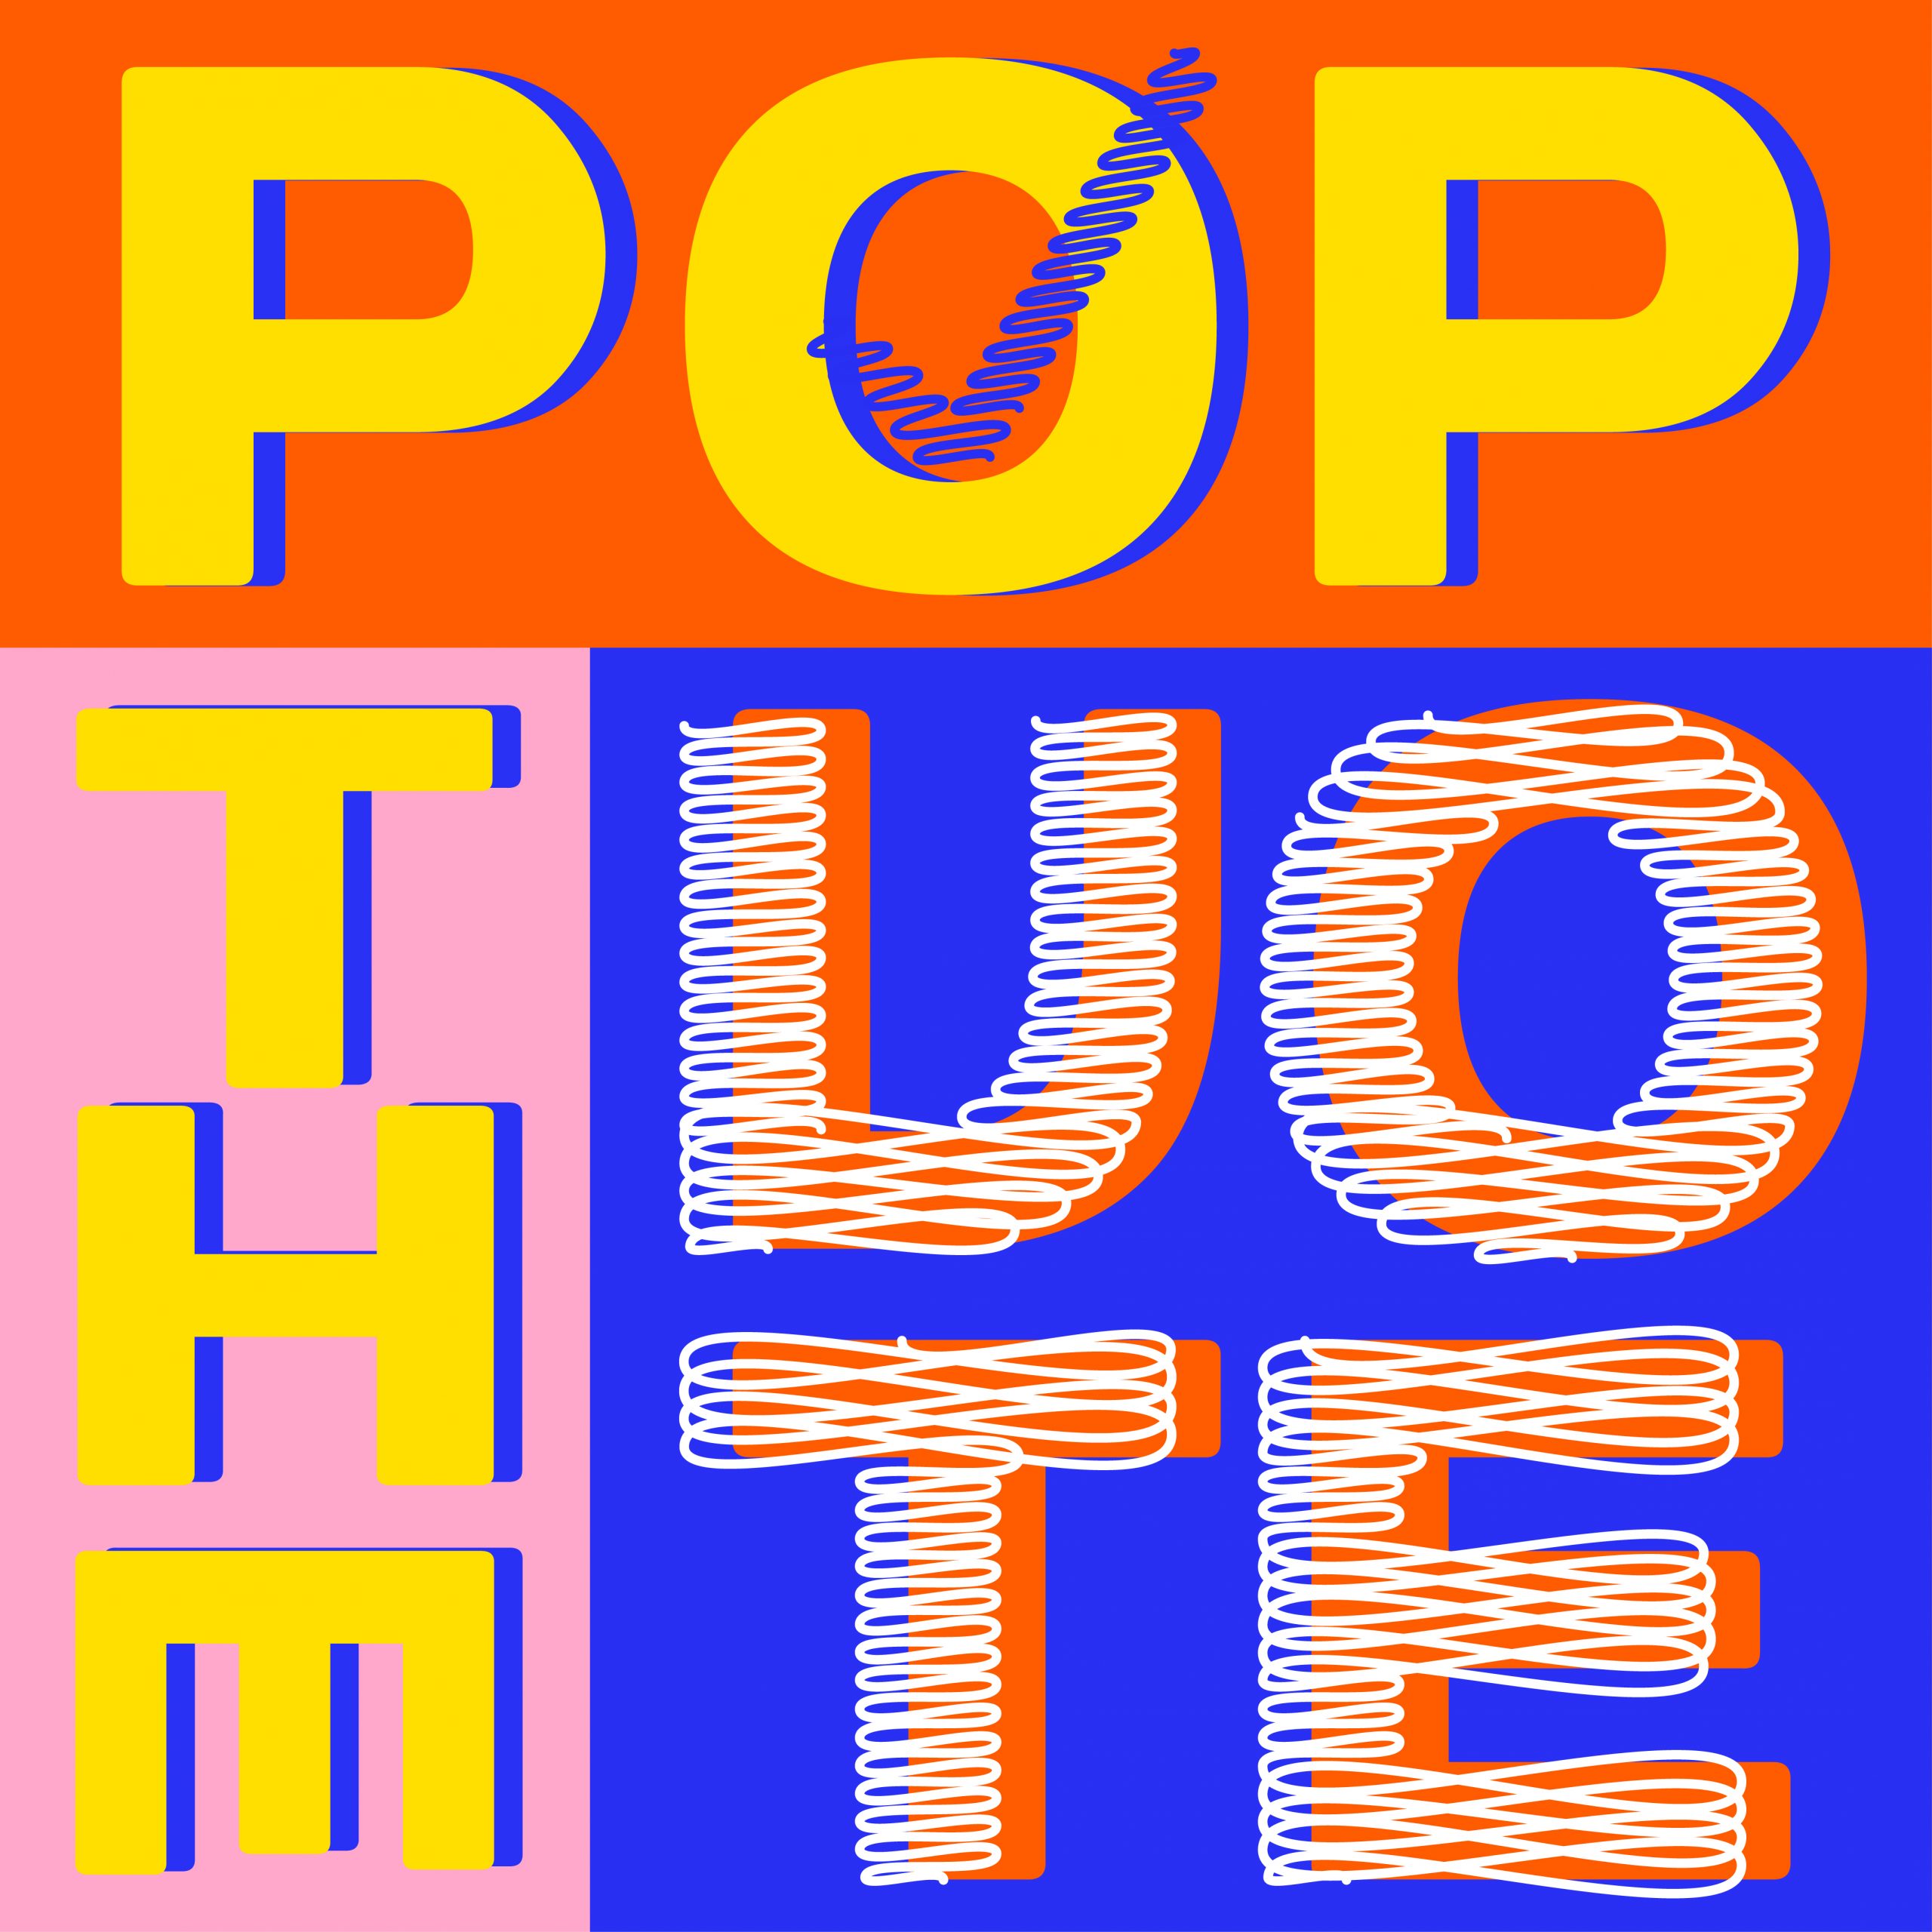 POP THE VOTE! CULTURE ON THE BALLOT